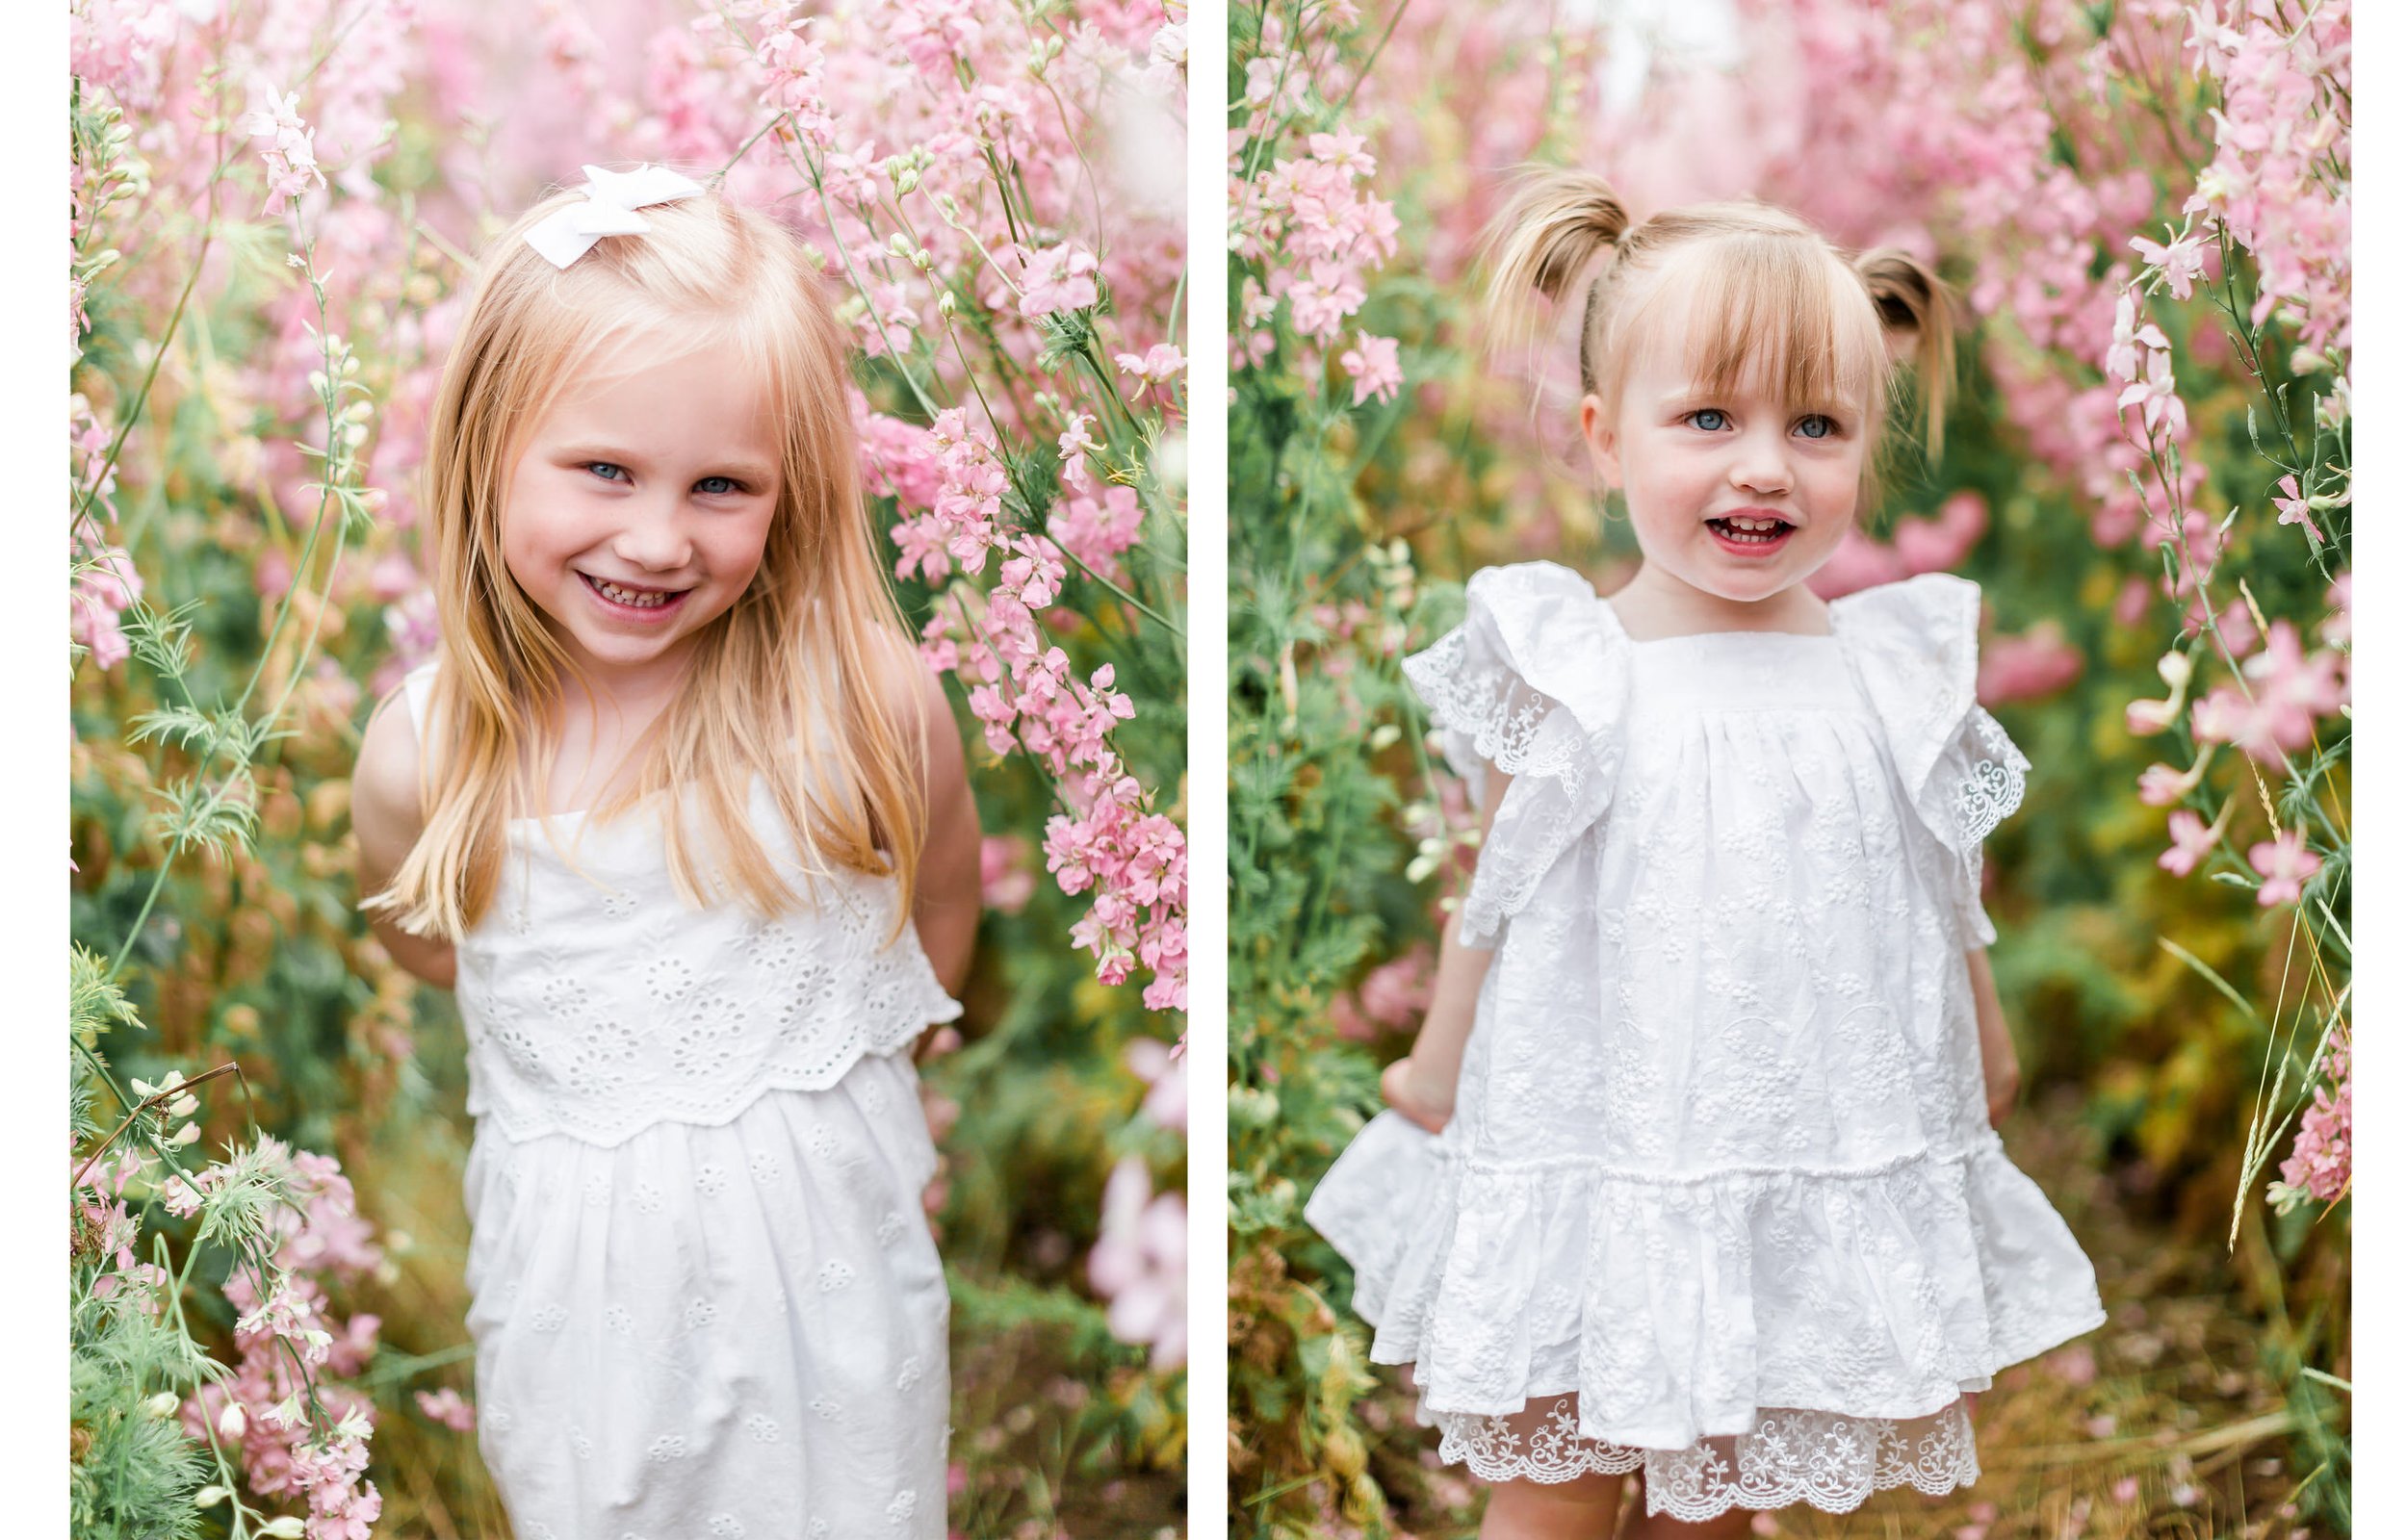 Confetti_fields_Iris-and_ivy_family_photography-3.jpg